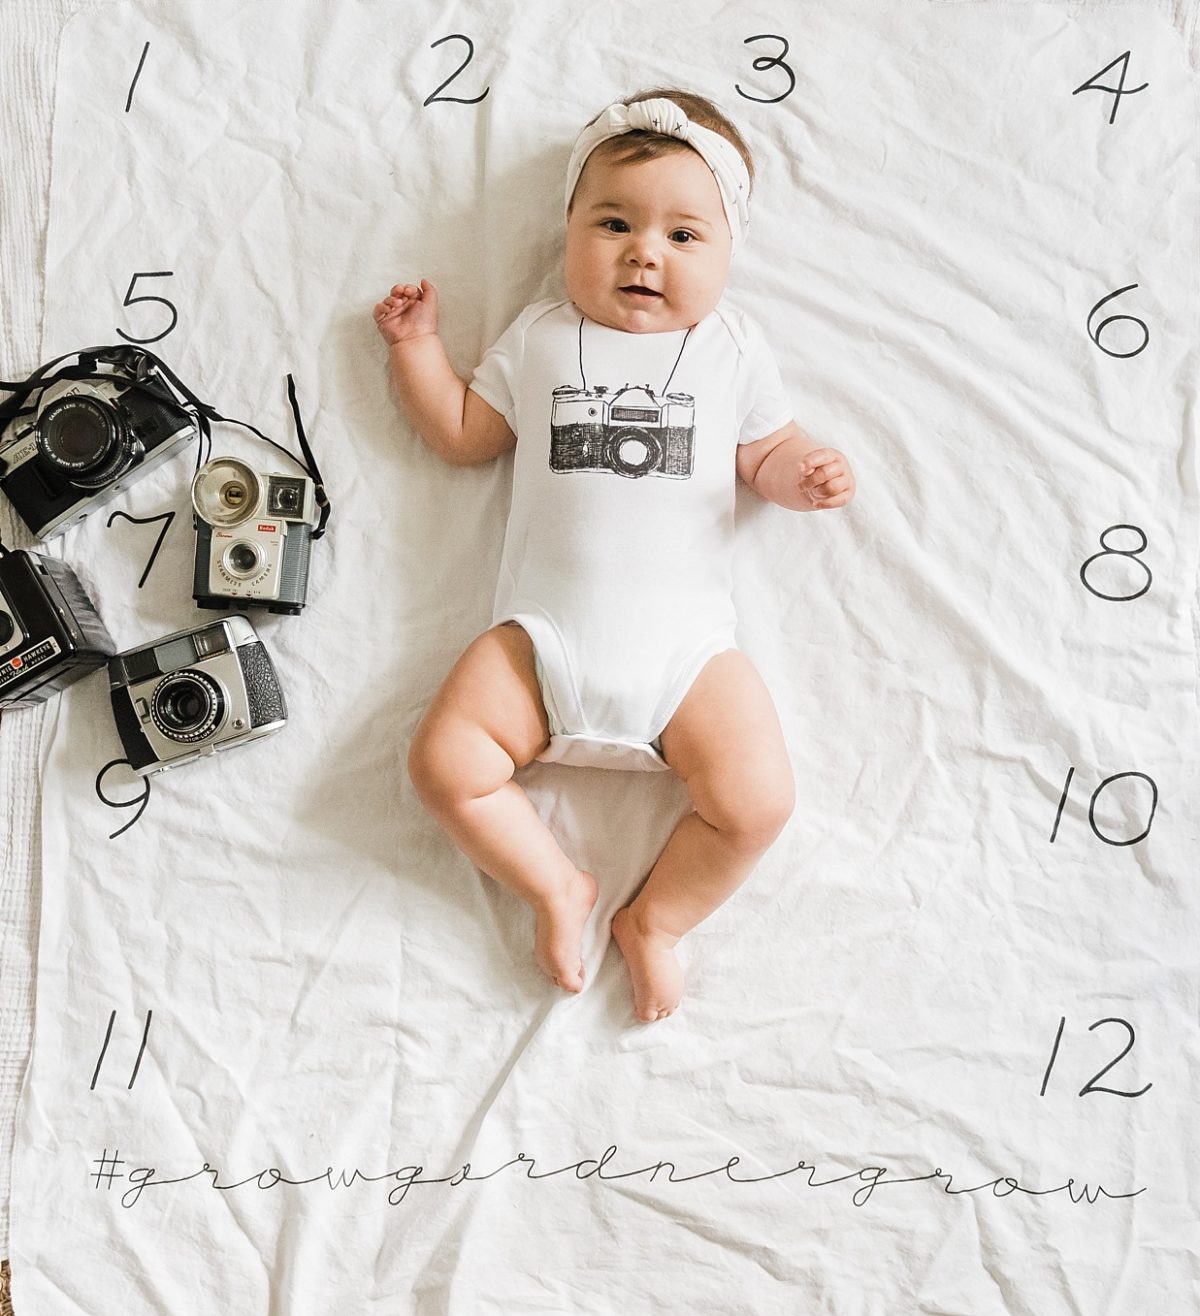 7 Months Young – Hatsy June